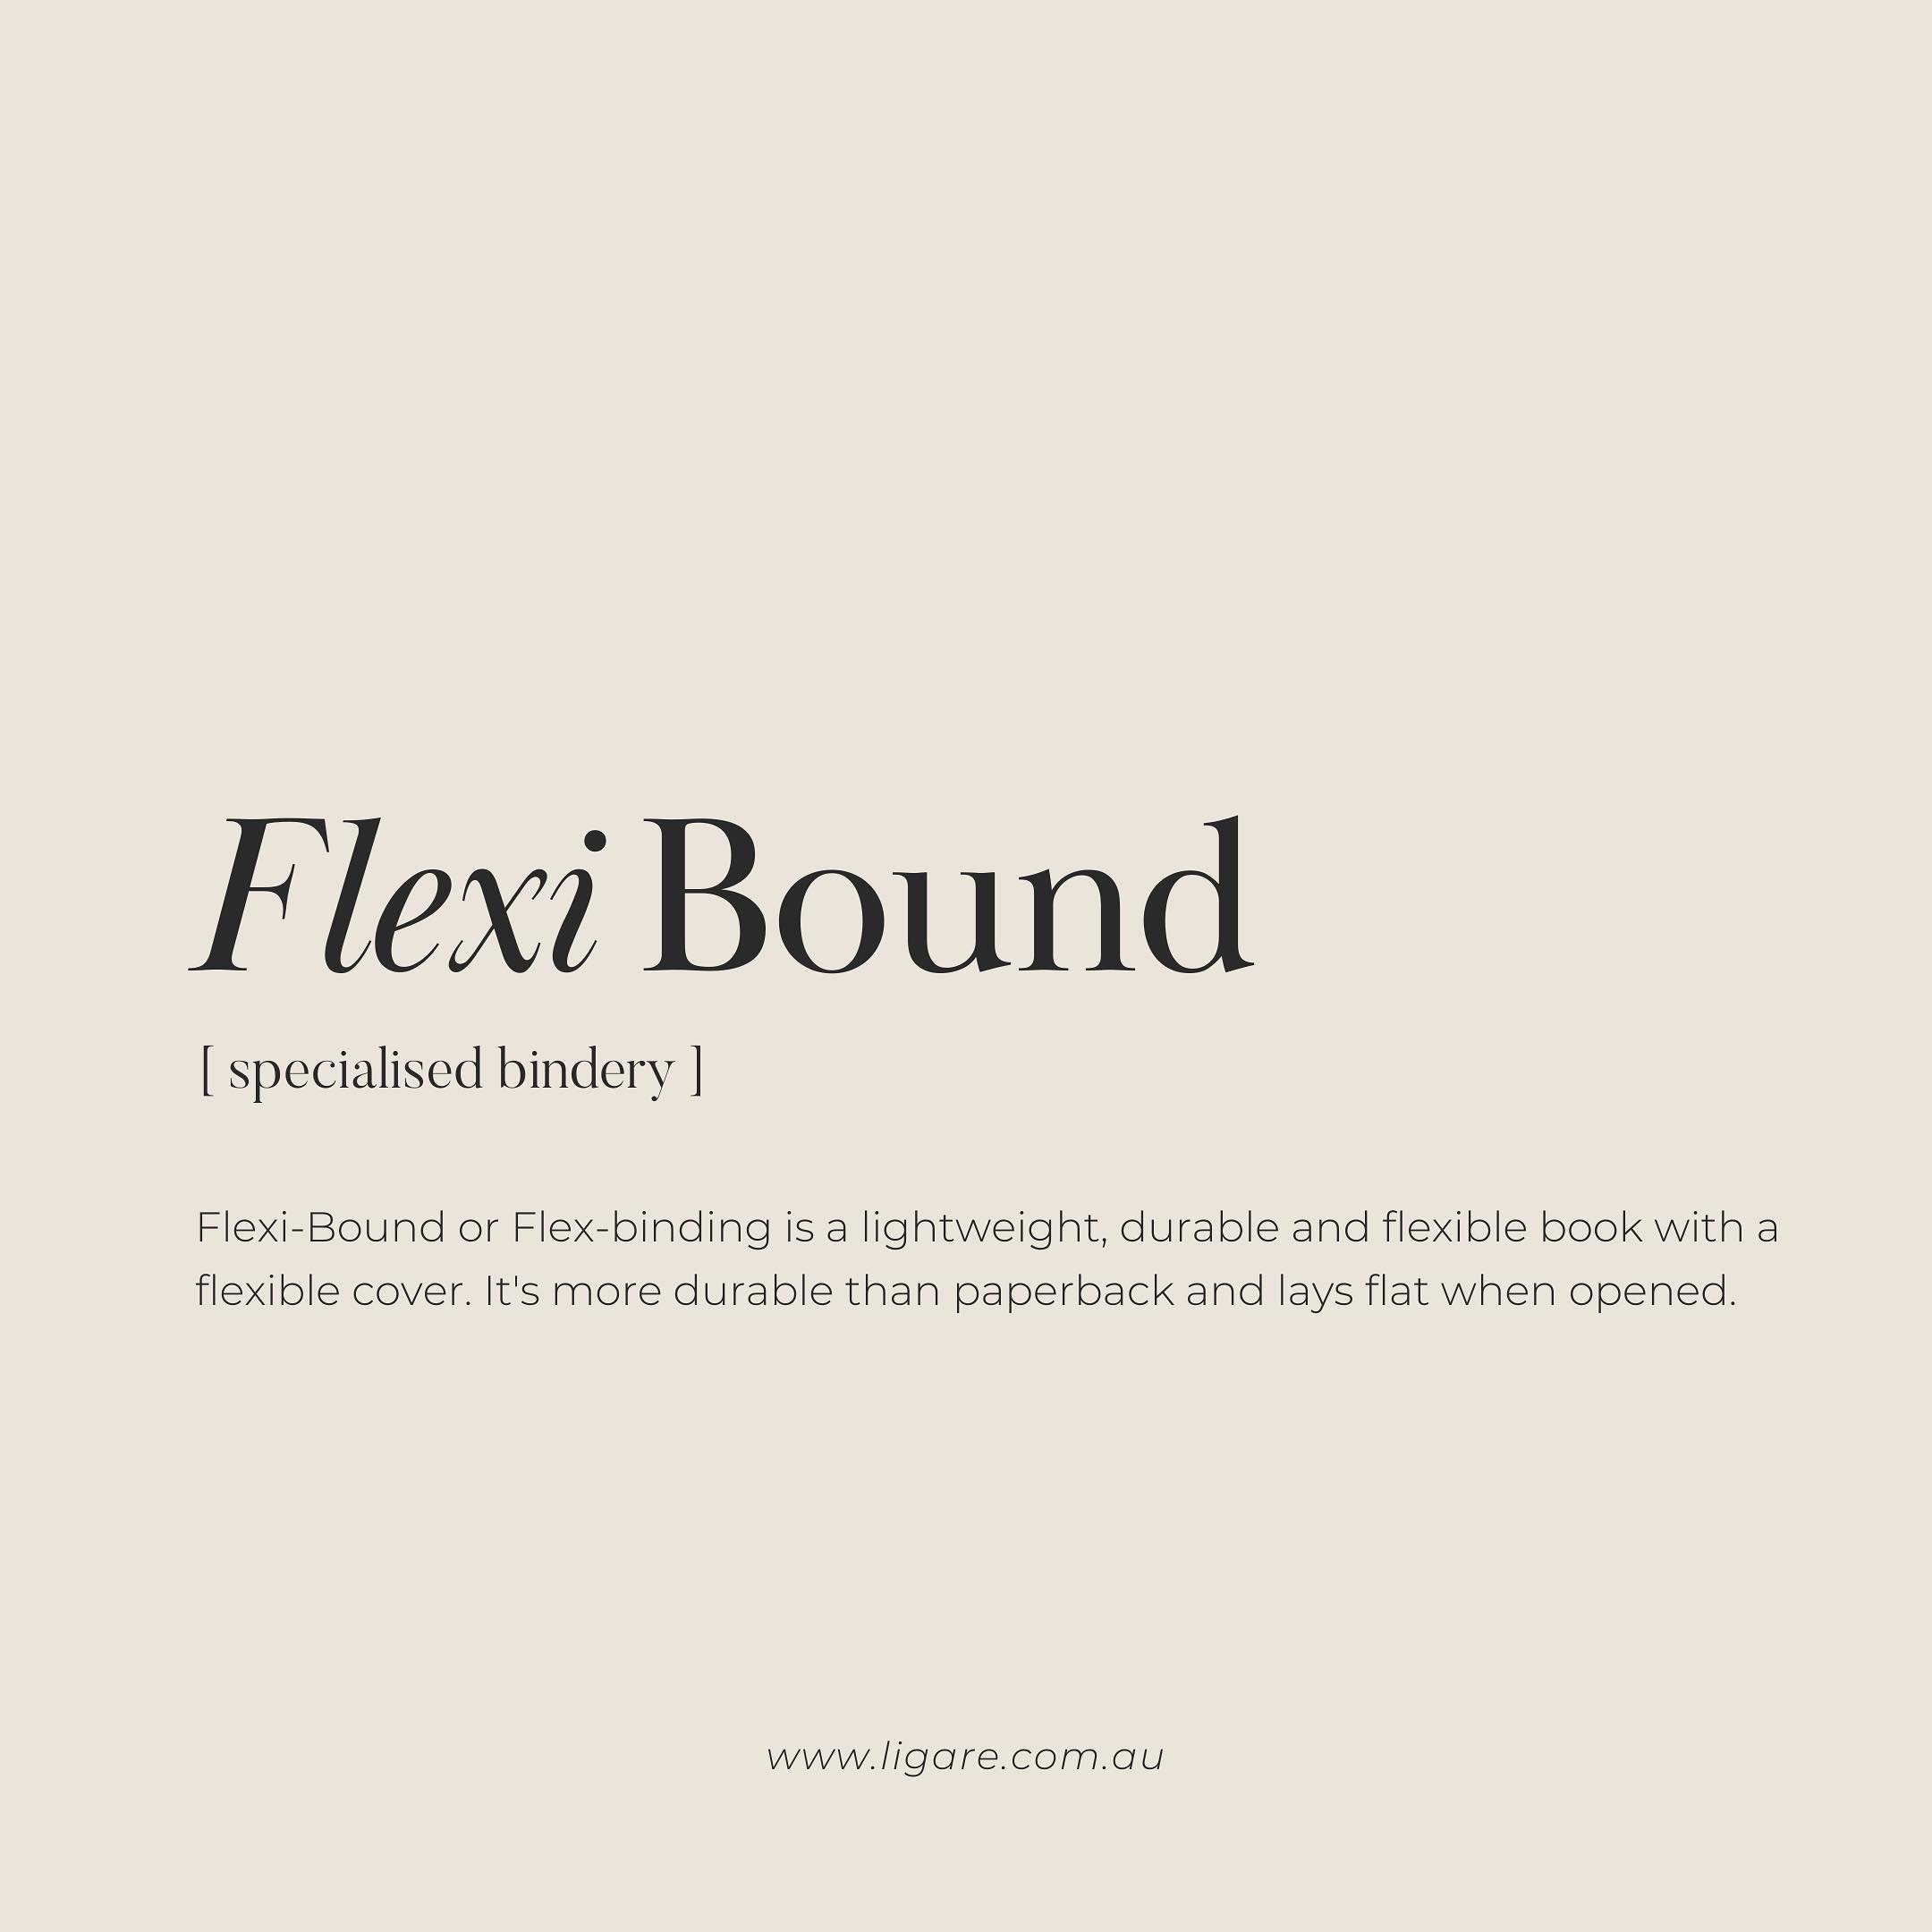 FLEXI-BOUND // SPECIALISED BINDERY ✨ 

Flexi-Bound or Flex-binding is a lightweight, durable and flexible book with a flexible cover. It&rsquo;s more durable than paperback and lays flat when opened.

&bull;
&bull;
&bull;

#wemakebooks #australianmad